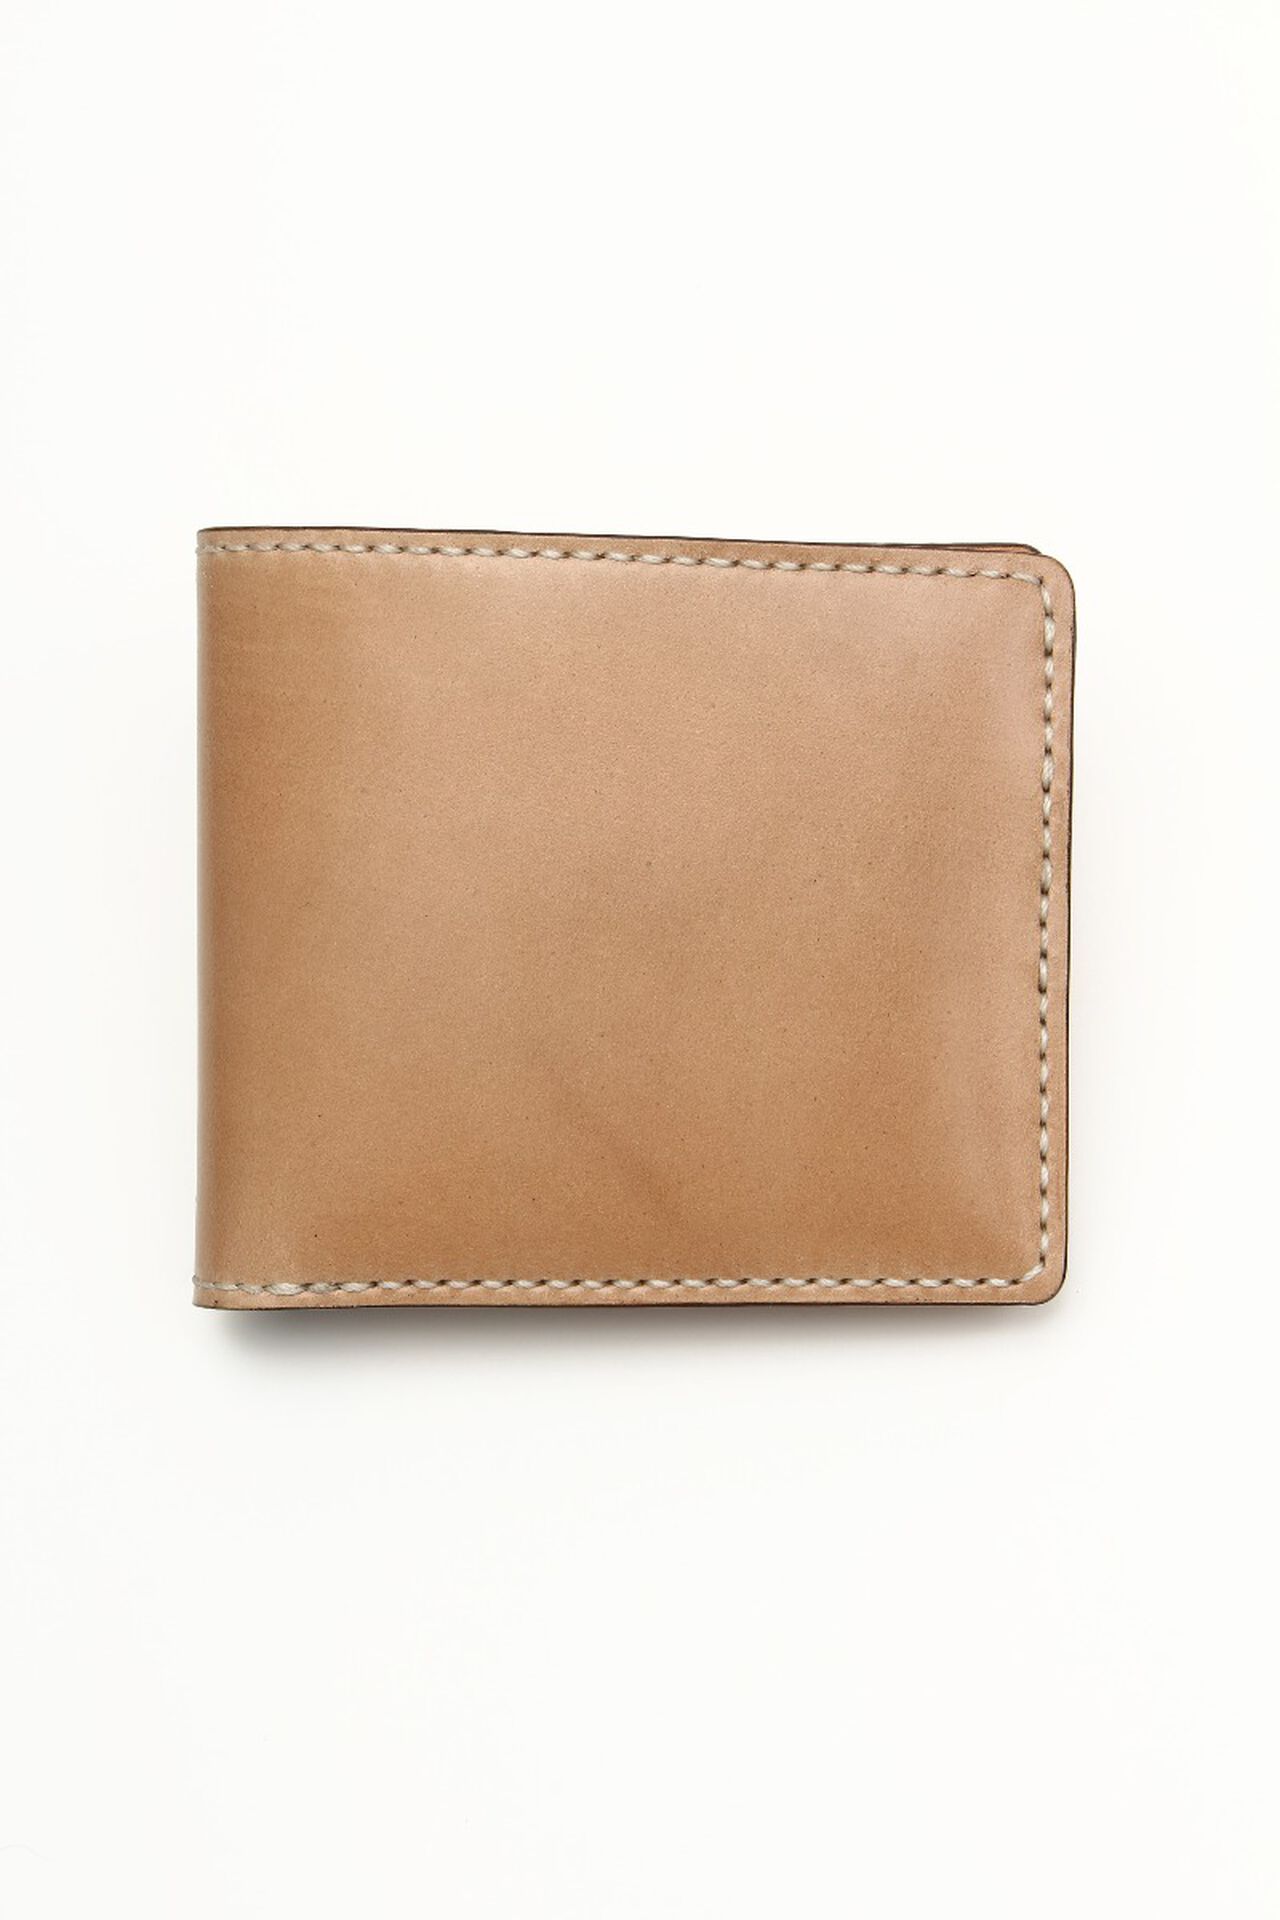 Short Wallet with Coin Pocket (Cordovan) (NATURAL),, large image number 1